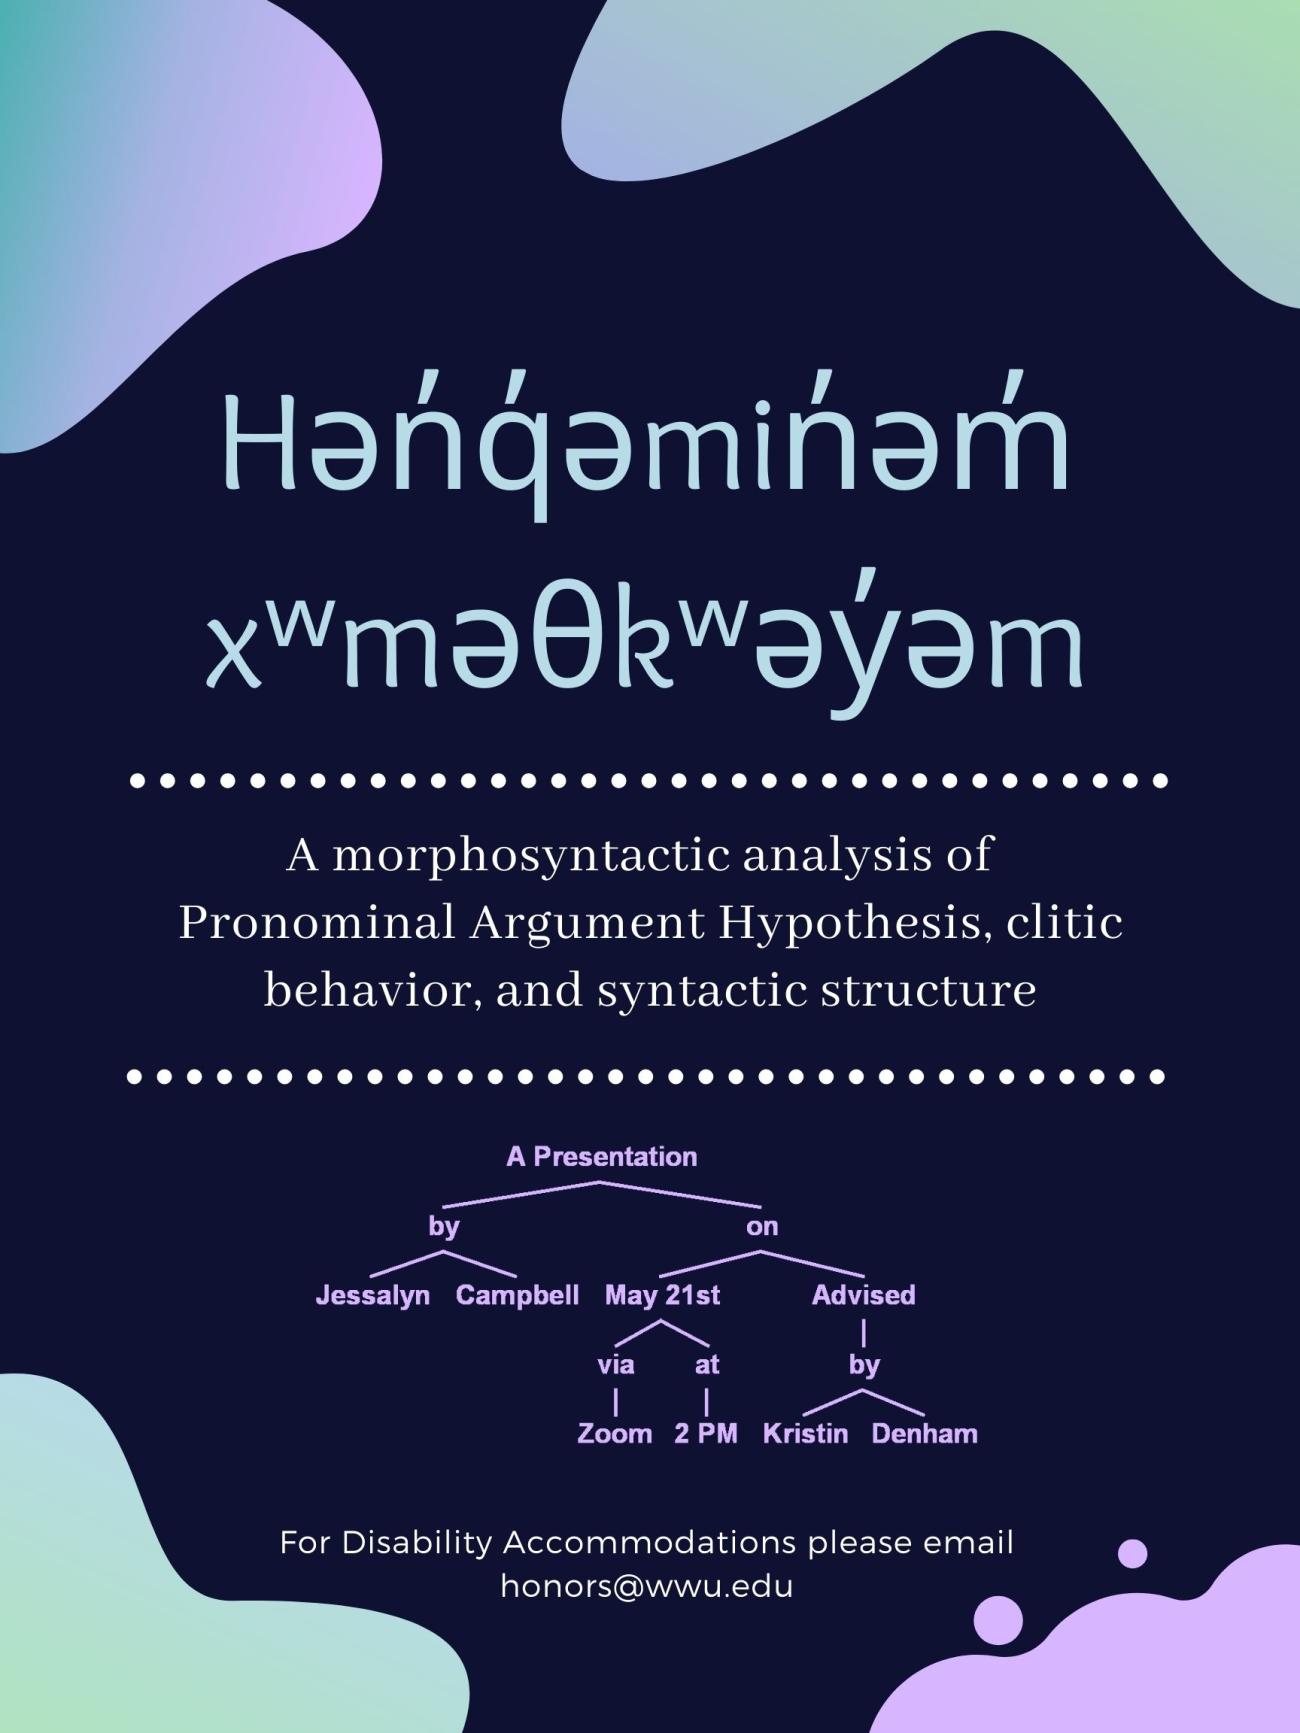 Dark blue poster with splashes of gradient purple and green in the corners. Text reads, "Hən̓q̓əmin̓əm̓ xʷməθkʷəy̓əm : A morphosyntactic analysis of Pronominal Argument Hypothesis, clitic behavior, and syntactic structure. A presentation by Jessalyn Campbell on May 21st at 2pm. Advised by Kristen Denham. For Disability Accommodations please email honors@wwu.edu." 